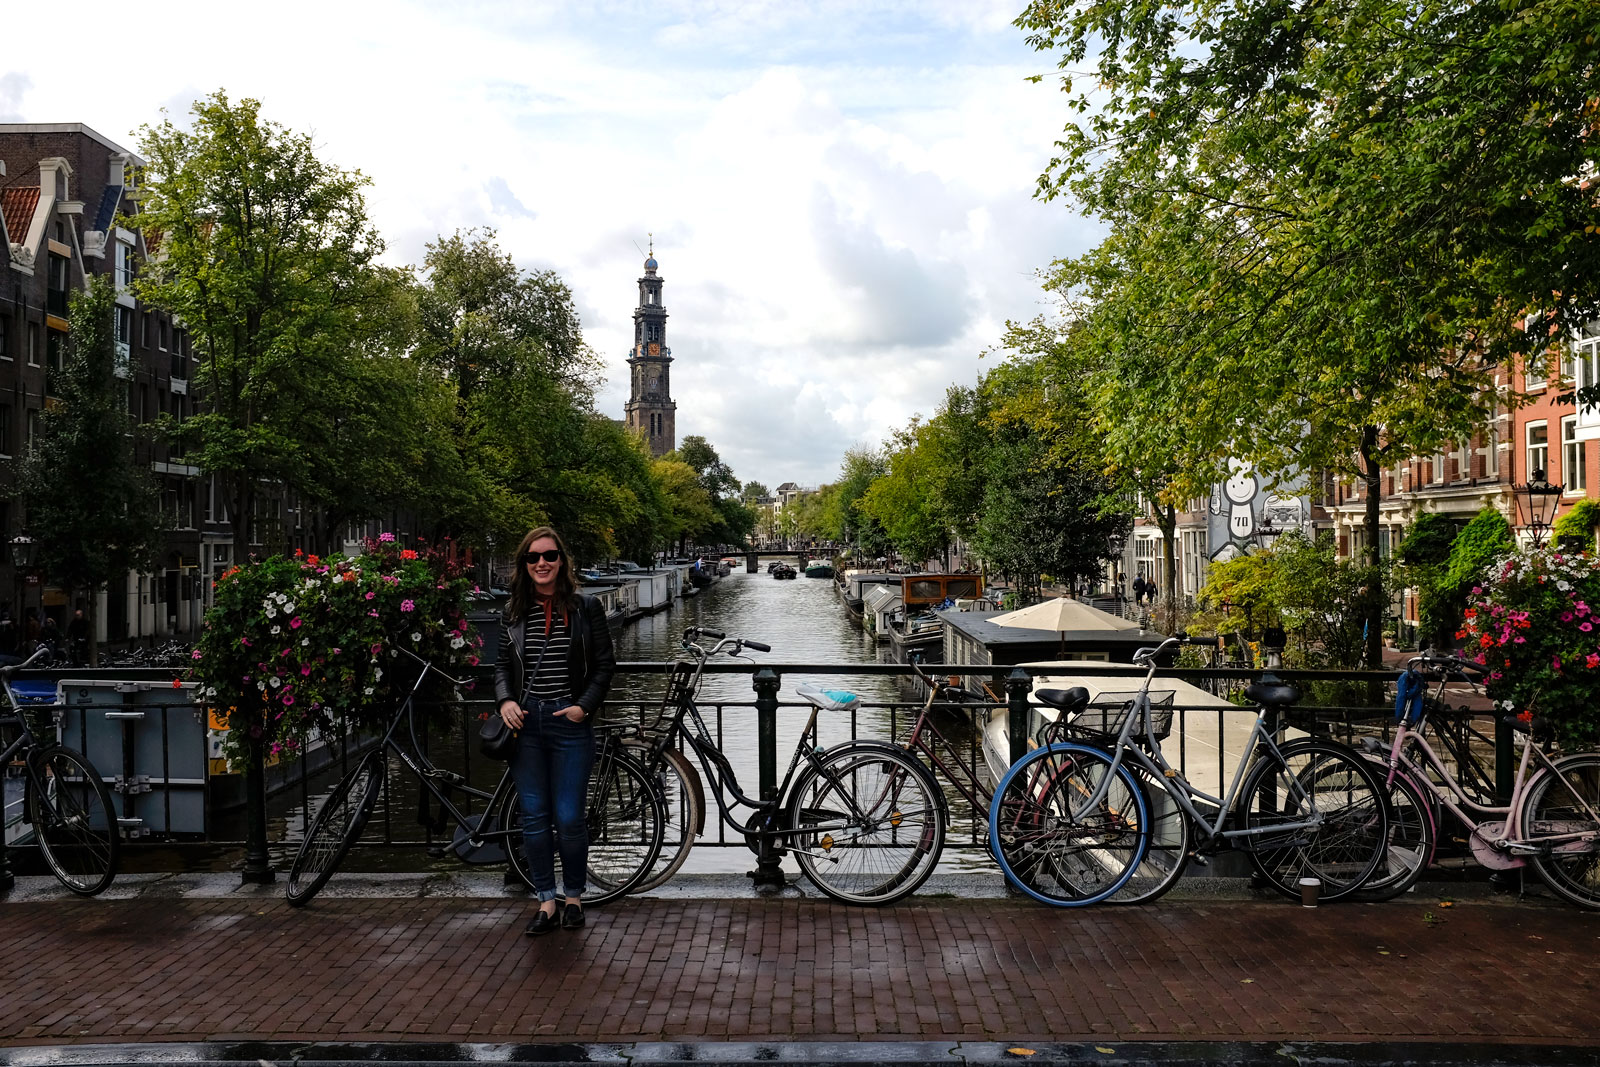 Alyssa stands near bicycles along a canal in Amsterdam